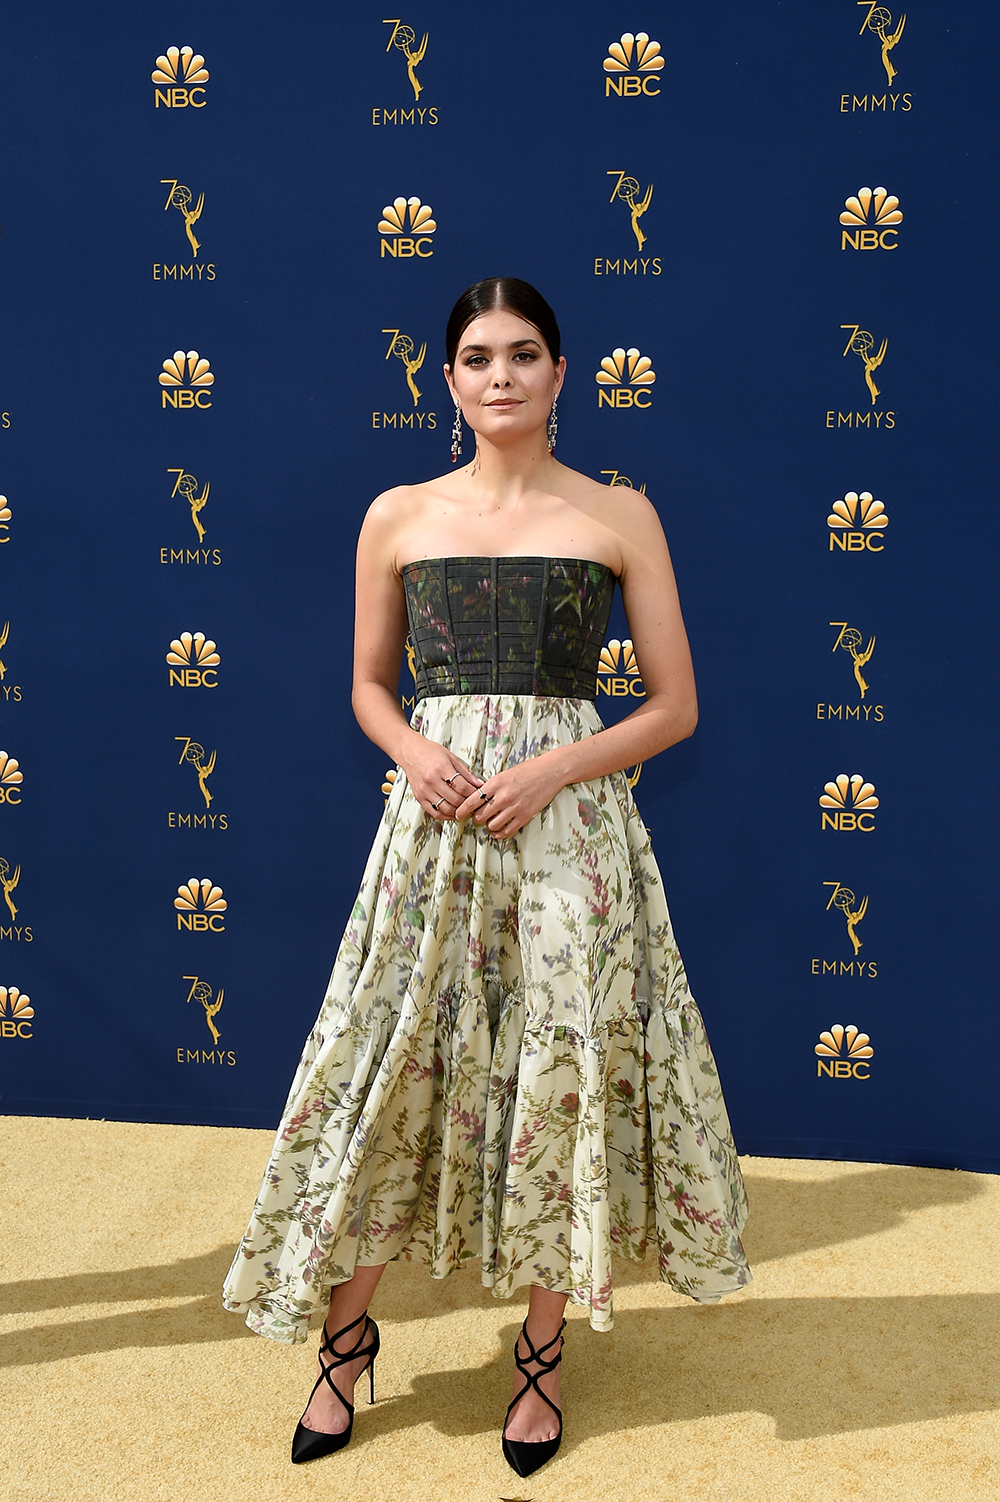 LOS ANGELES, CA - SEPTEMBER 17: 70th ANNUAL PRIMETIME EMMY AWARDS -- Pictured: (l-r) Samantha Colley arrives to the 70th Annual Primetime Emmy Awards held at the Microsoft Theater on September 17, 2018. NUP_184215 (Photo by Kevork Djansezian/NBC/NBCU Photo Bank via Getty Images)